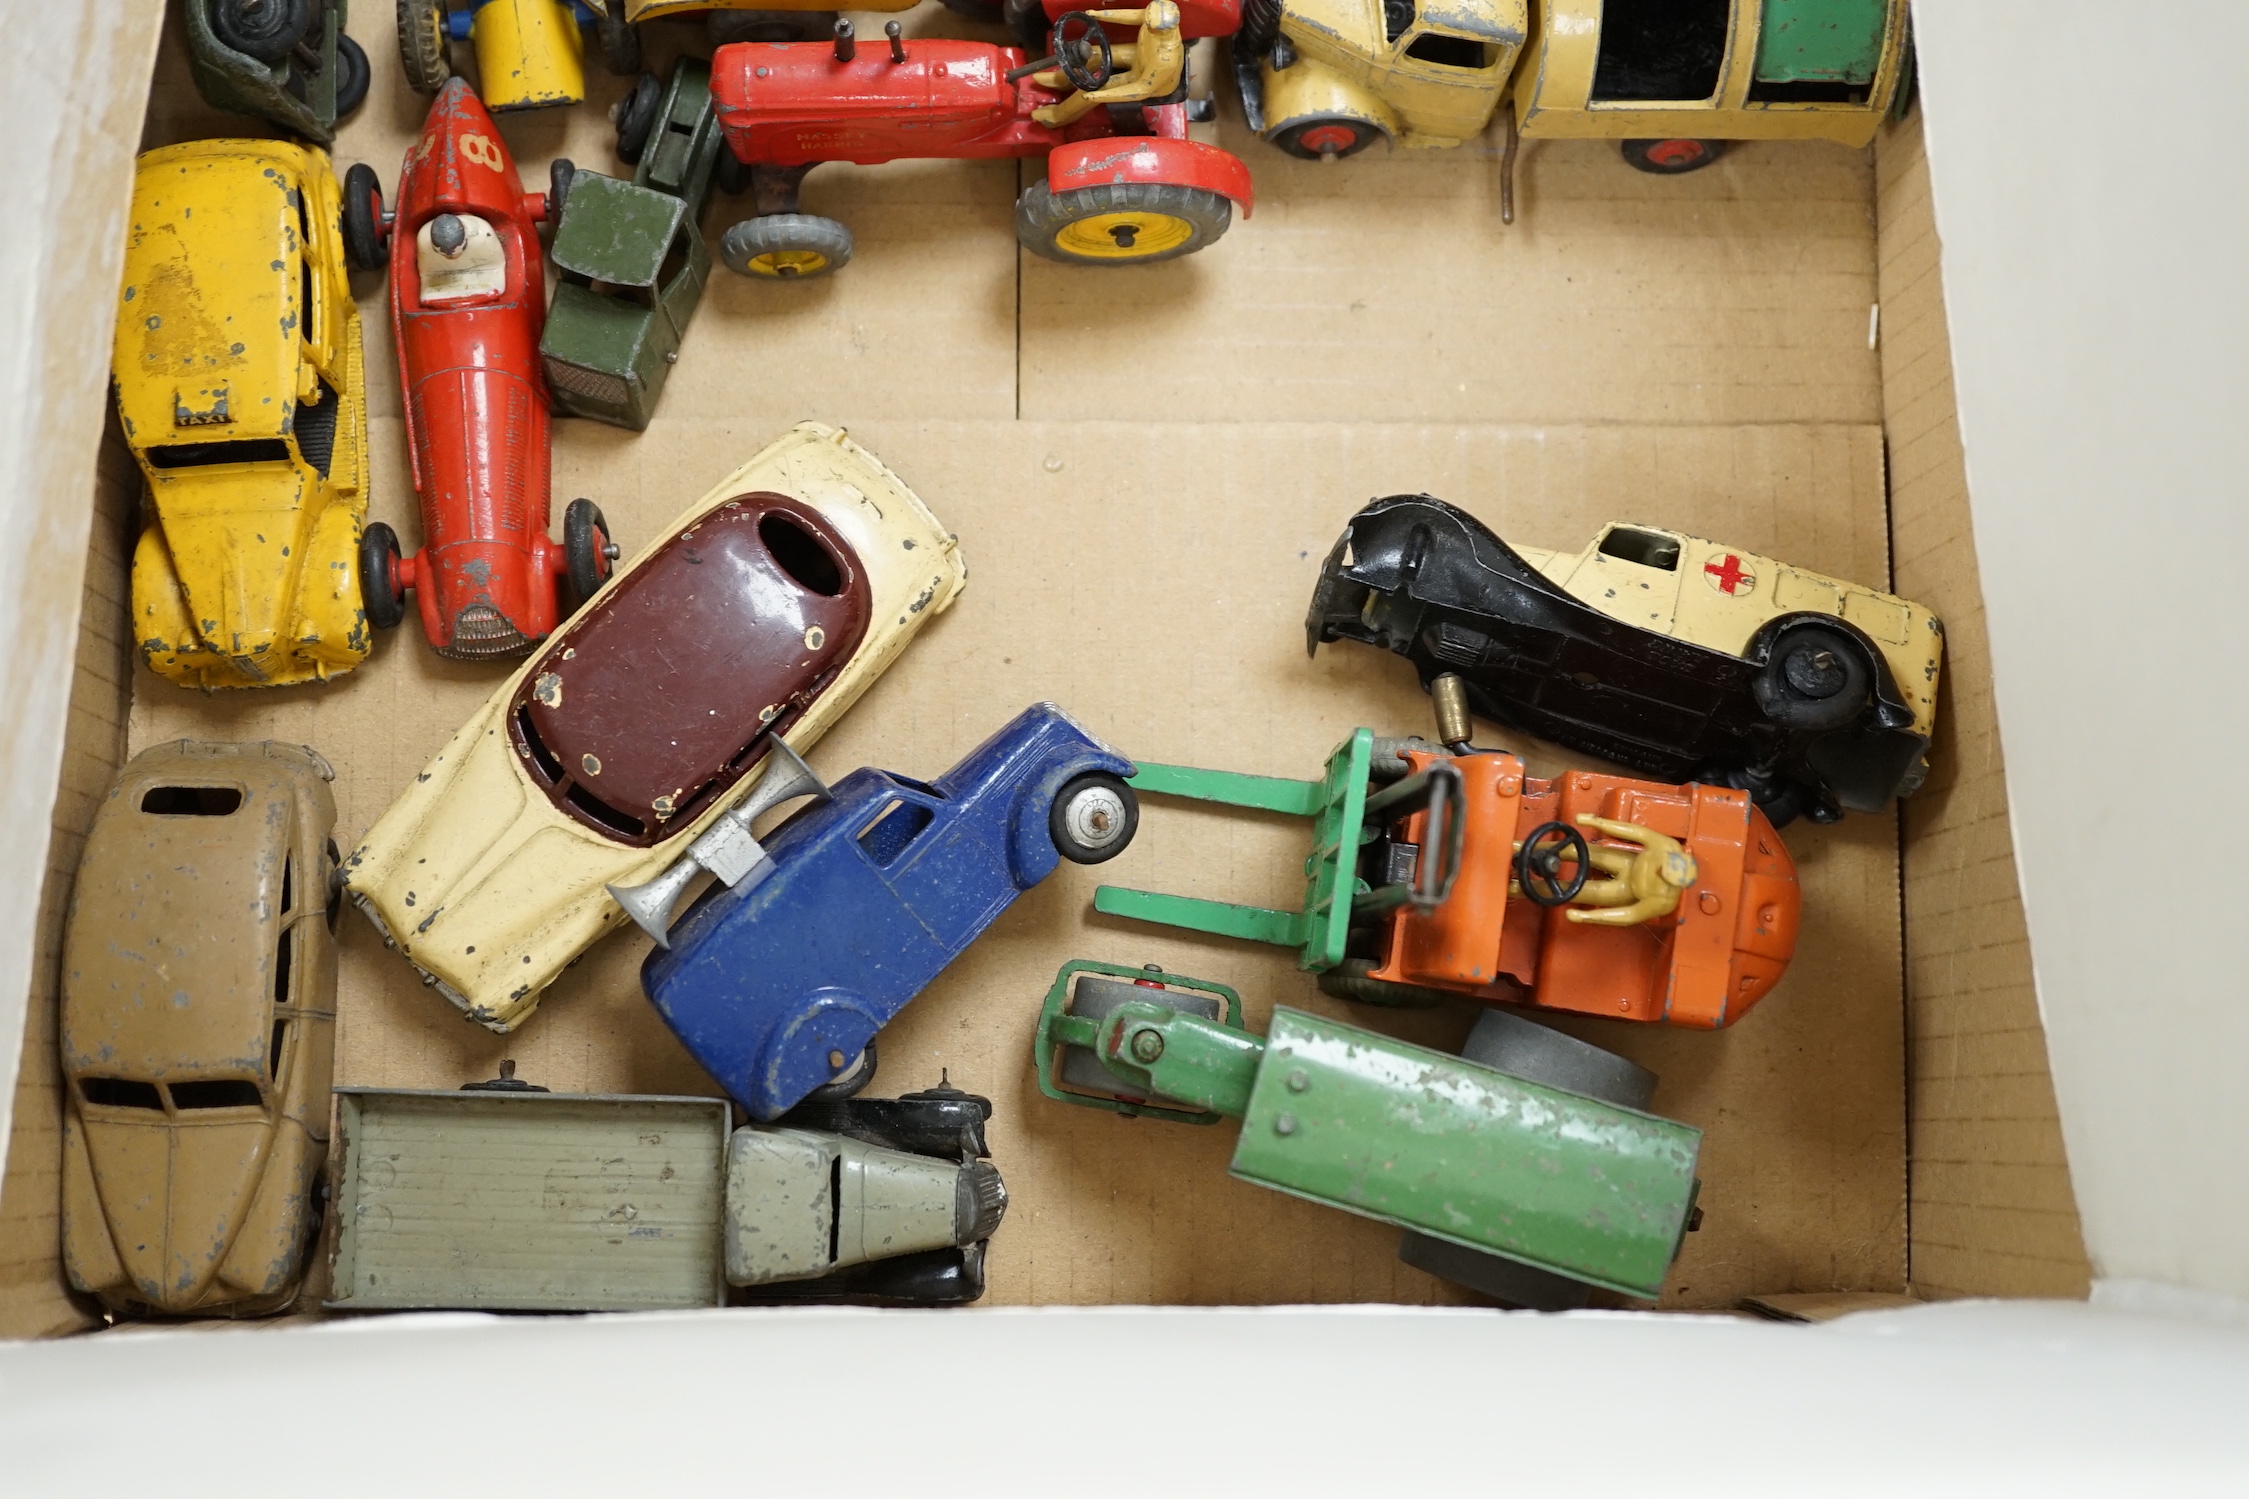 Twenty Dinky toys for restoration, including a Hudson Sedan, Loudspeaker van, Double deck Bus, Vanguard, etc. together with a Marx tinplate tractor crawler and a Tri-ang Minic caravan